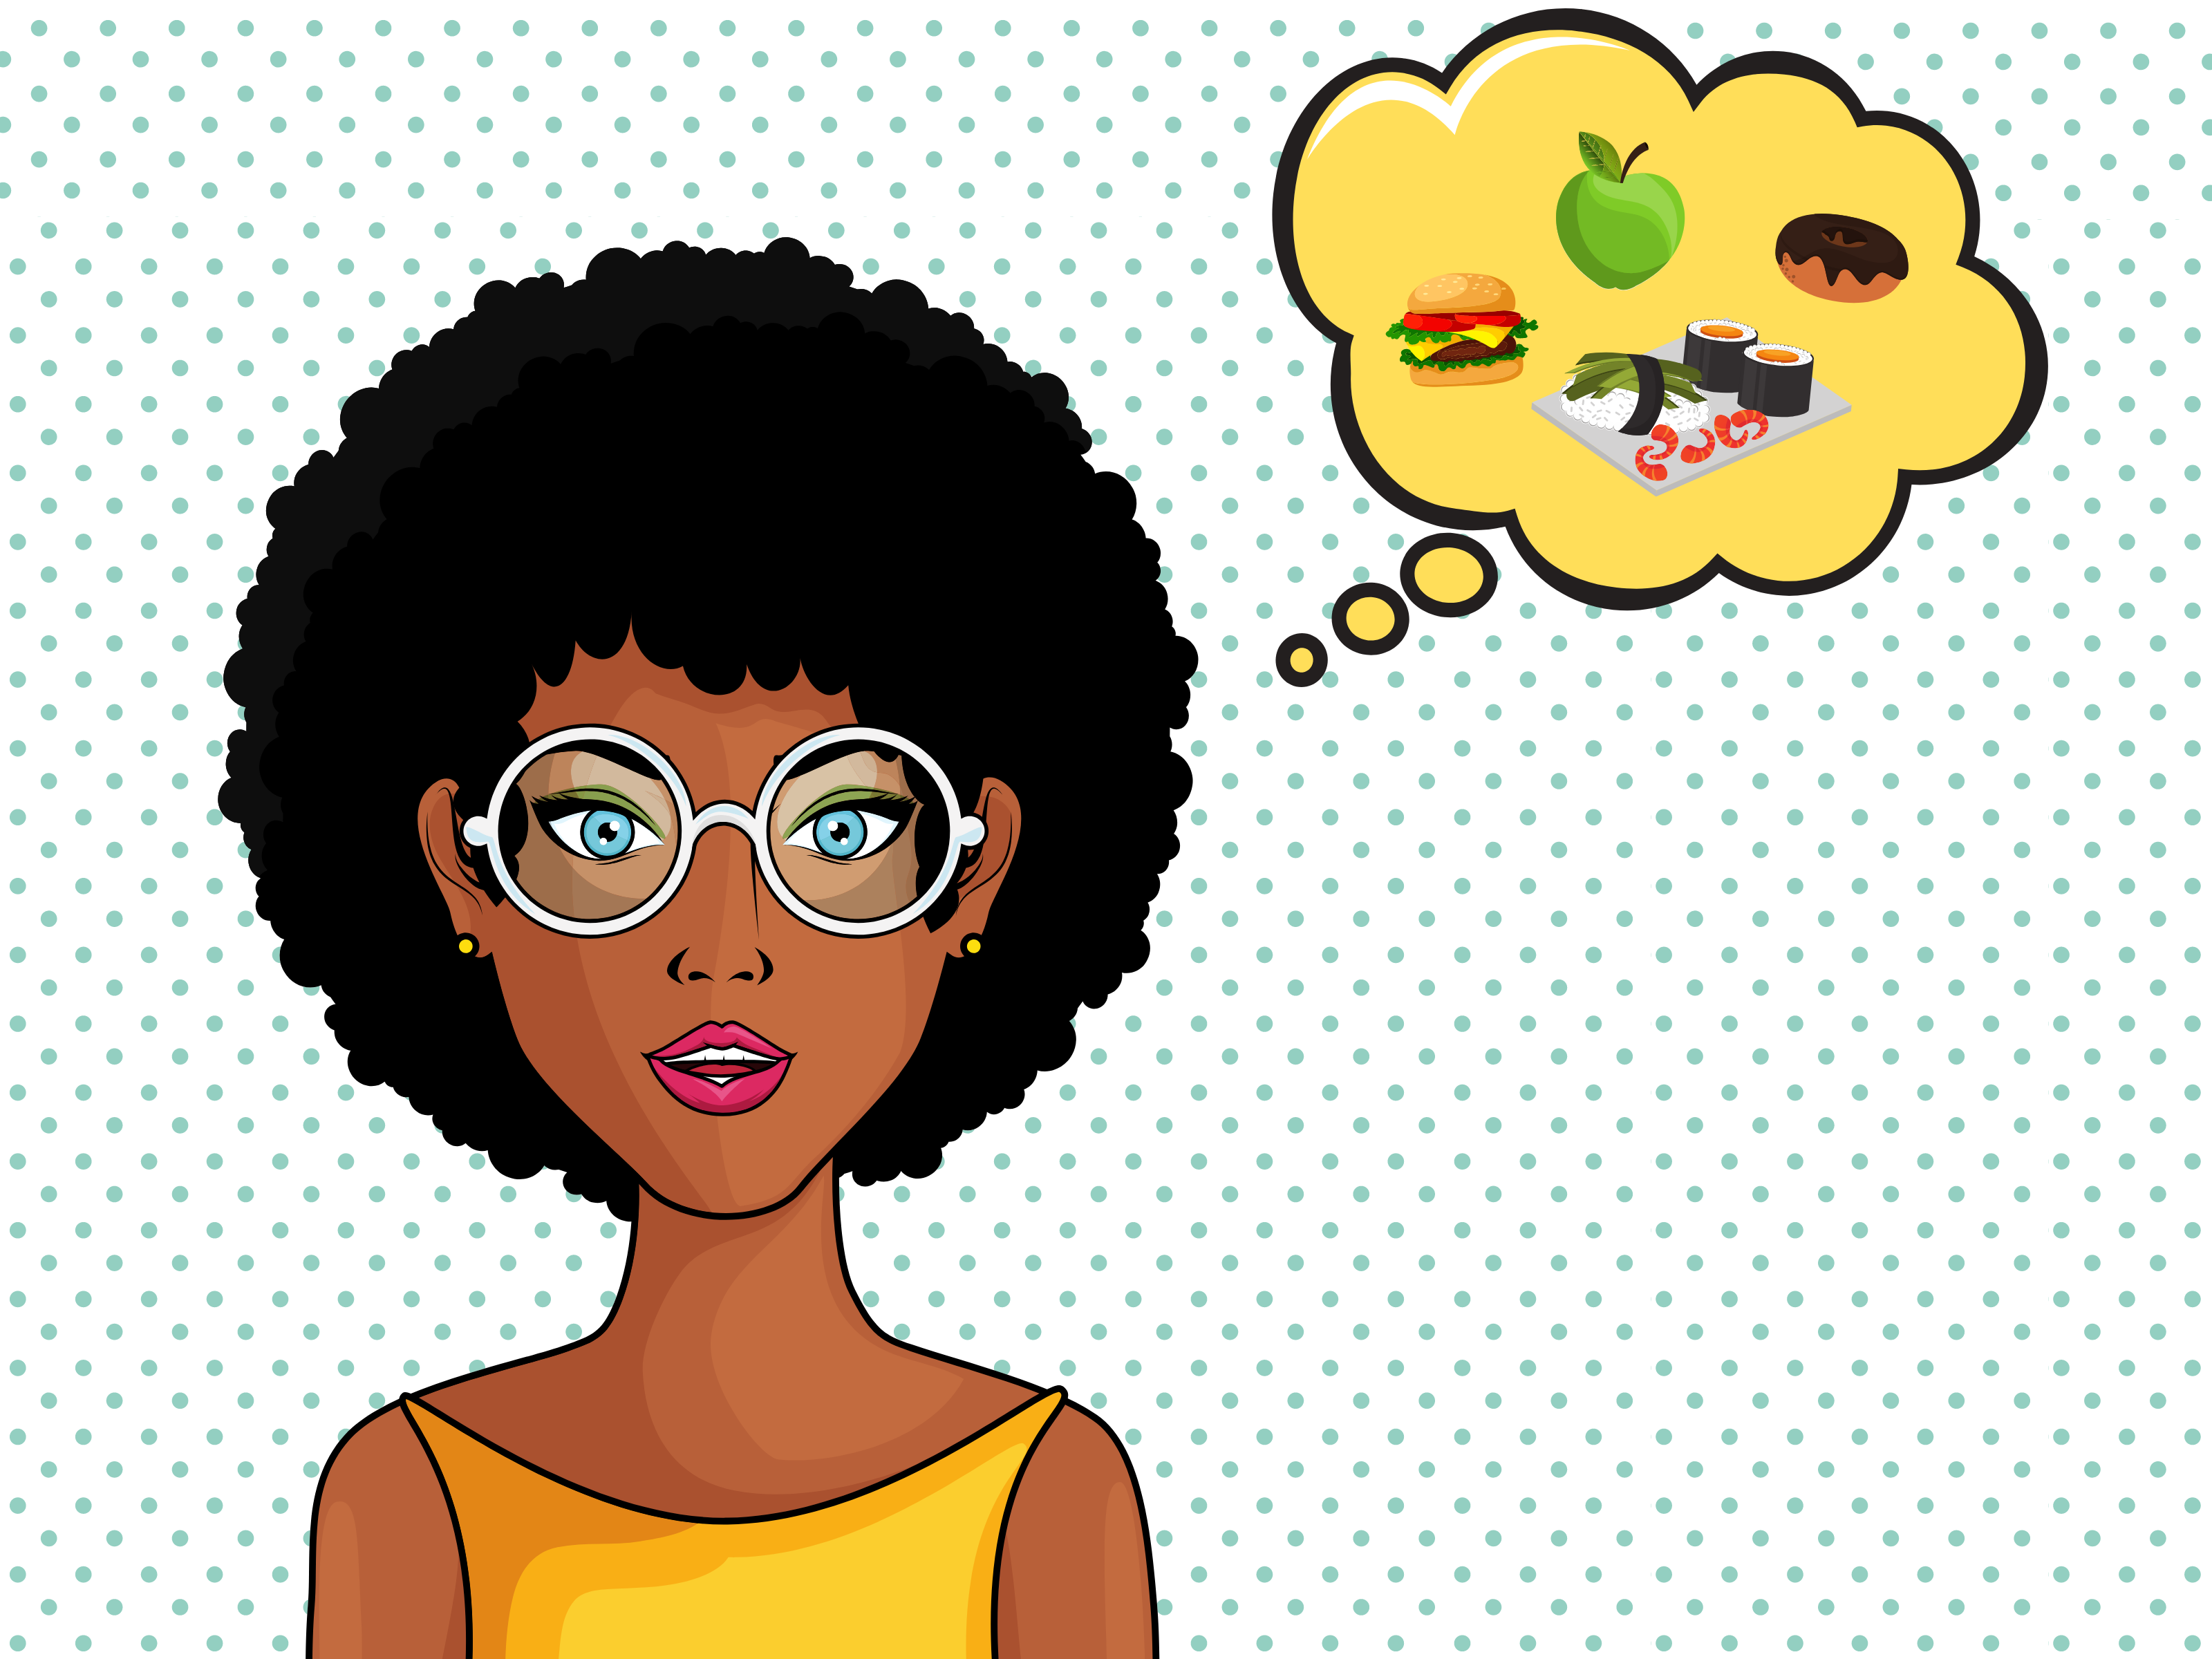 Cute comic-style cartoon of a pretty, young, black woman with glasses and a thought bubble with images of food...some healthier than others...as she's wondering what she ought to eat today.